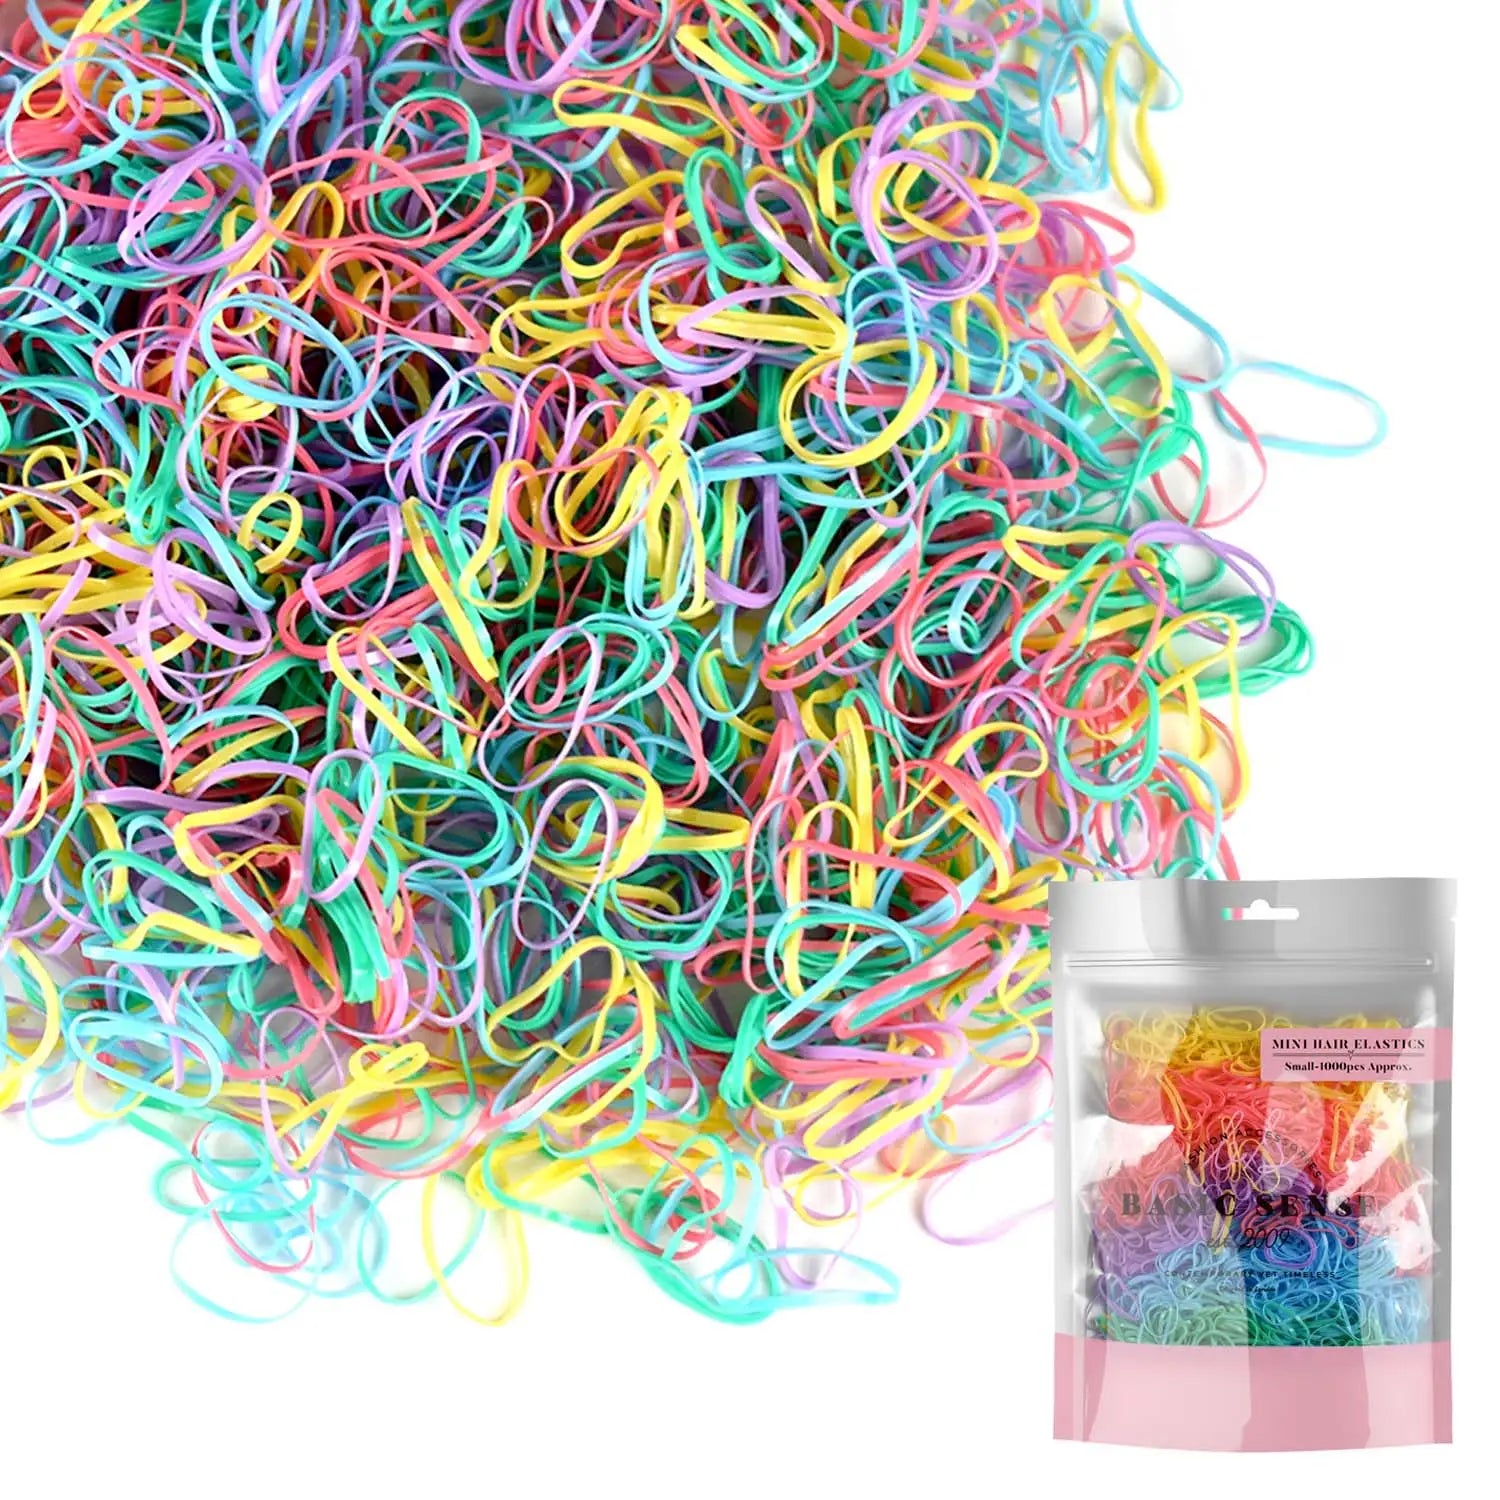 Colorful mini rubber bands for hair - neon, pastel, and neutral shades